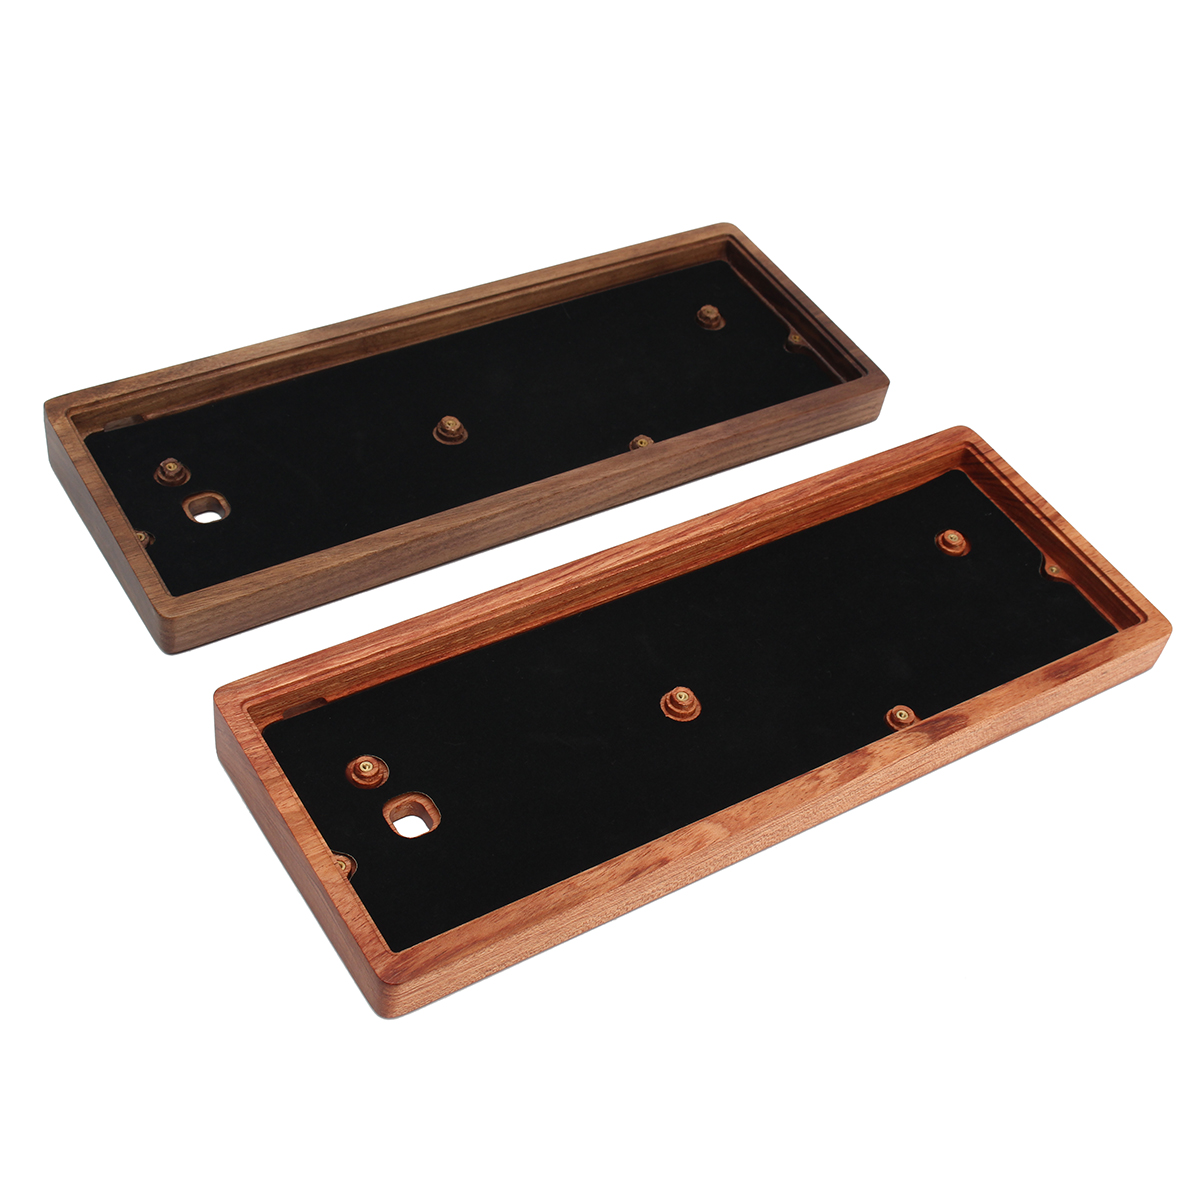 GH60-Solid-Wooden-Case-Customized-Shell-Base-For-60-Mini-Mechanical-Gaming-Keyboard-1175038